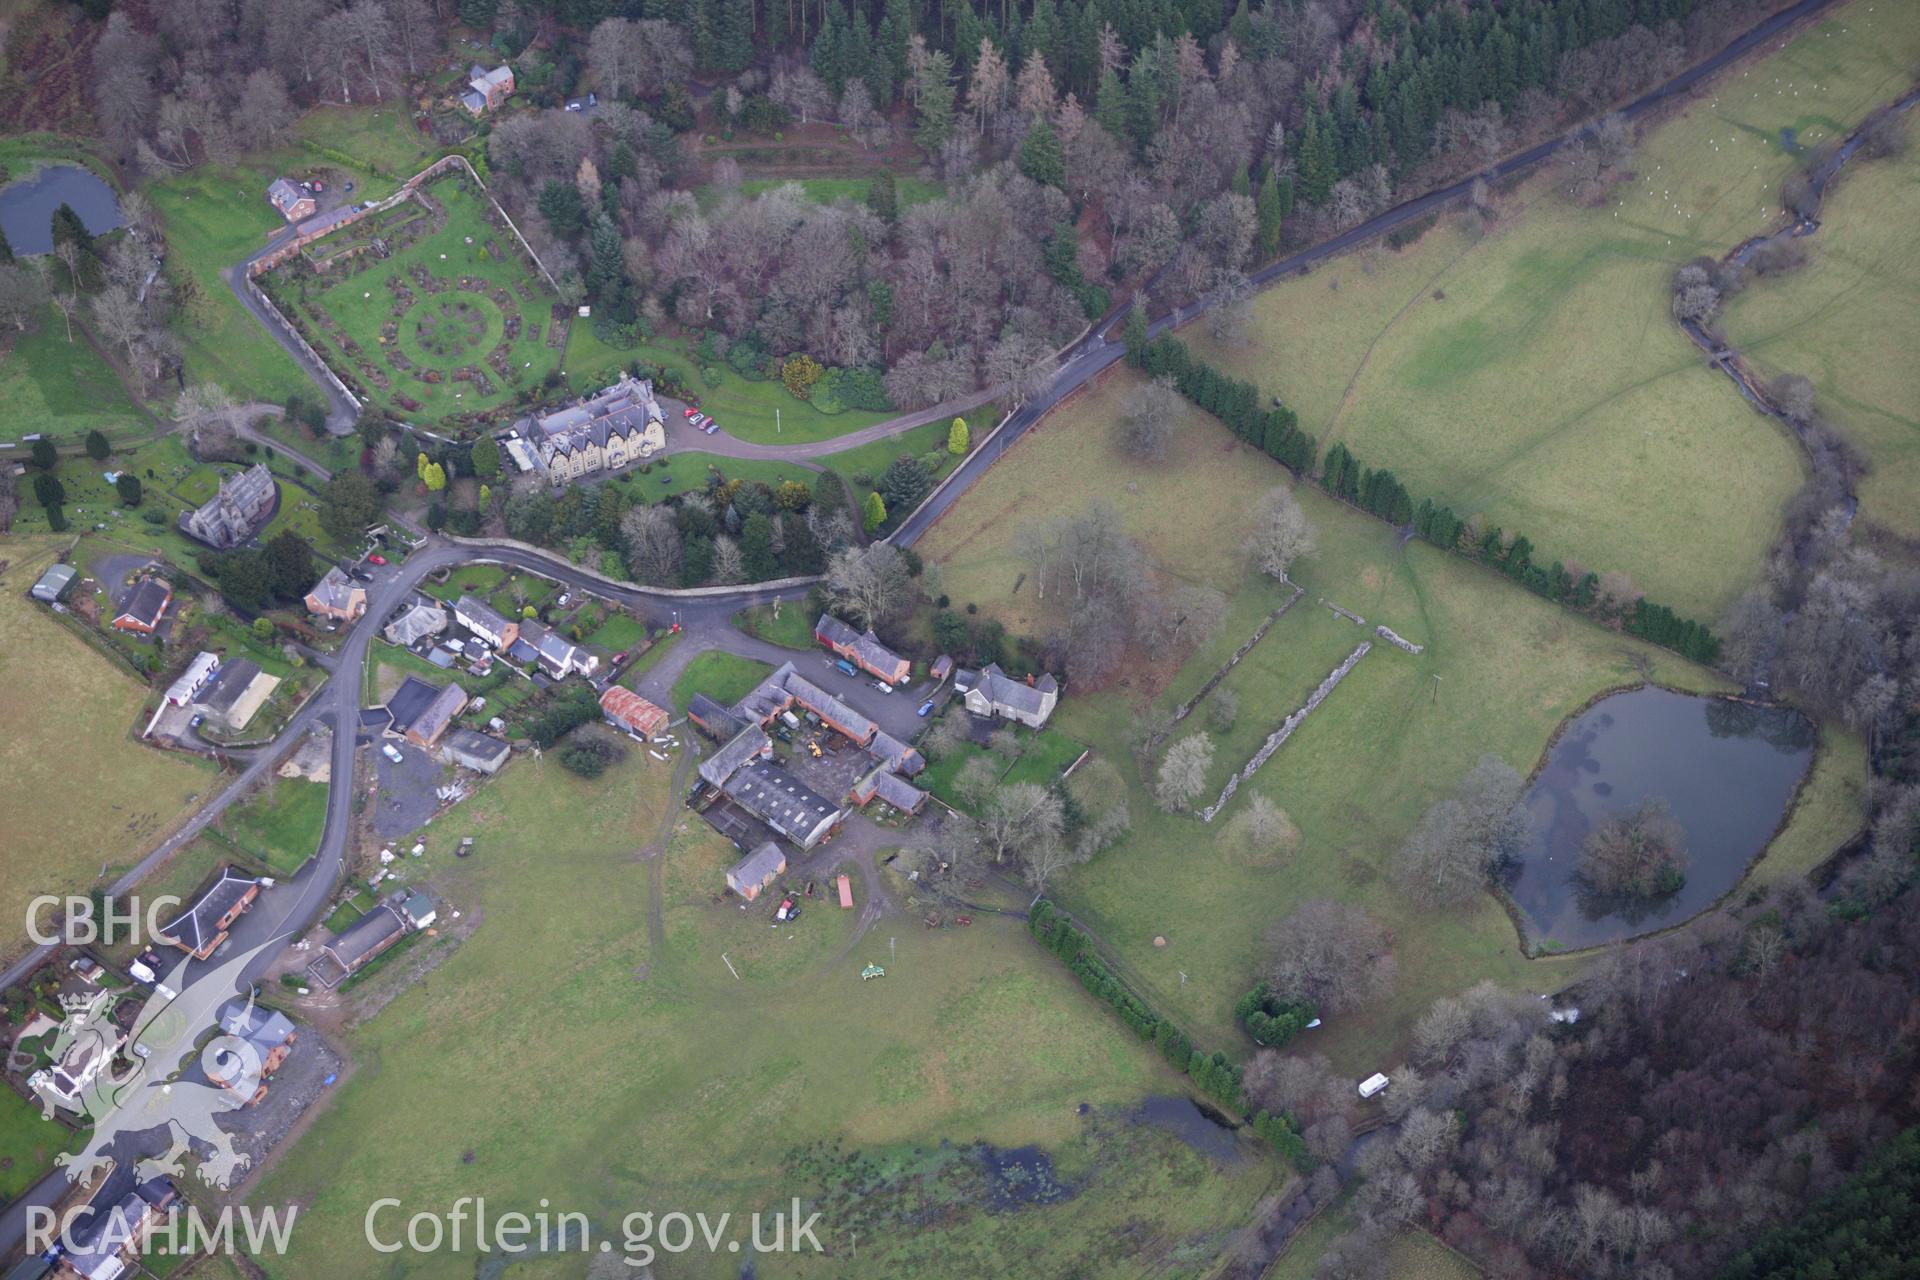 RCAHMW colour oblique aerial photograph of Abbey Cwmhir. Taken on 10 December 2009 by Toby Driver